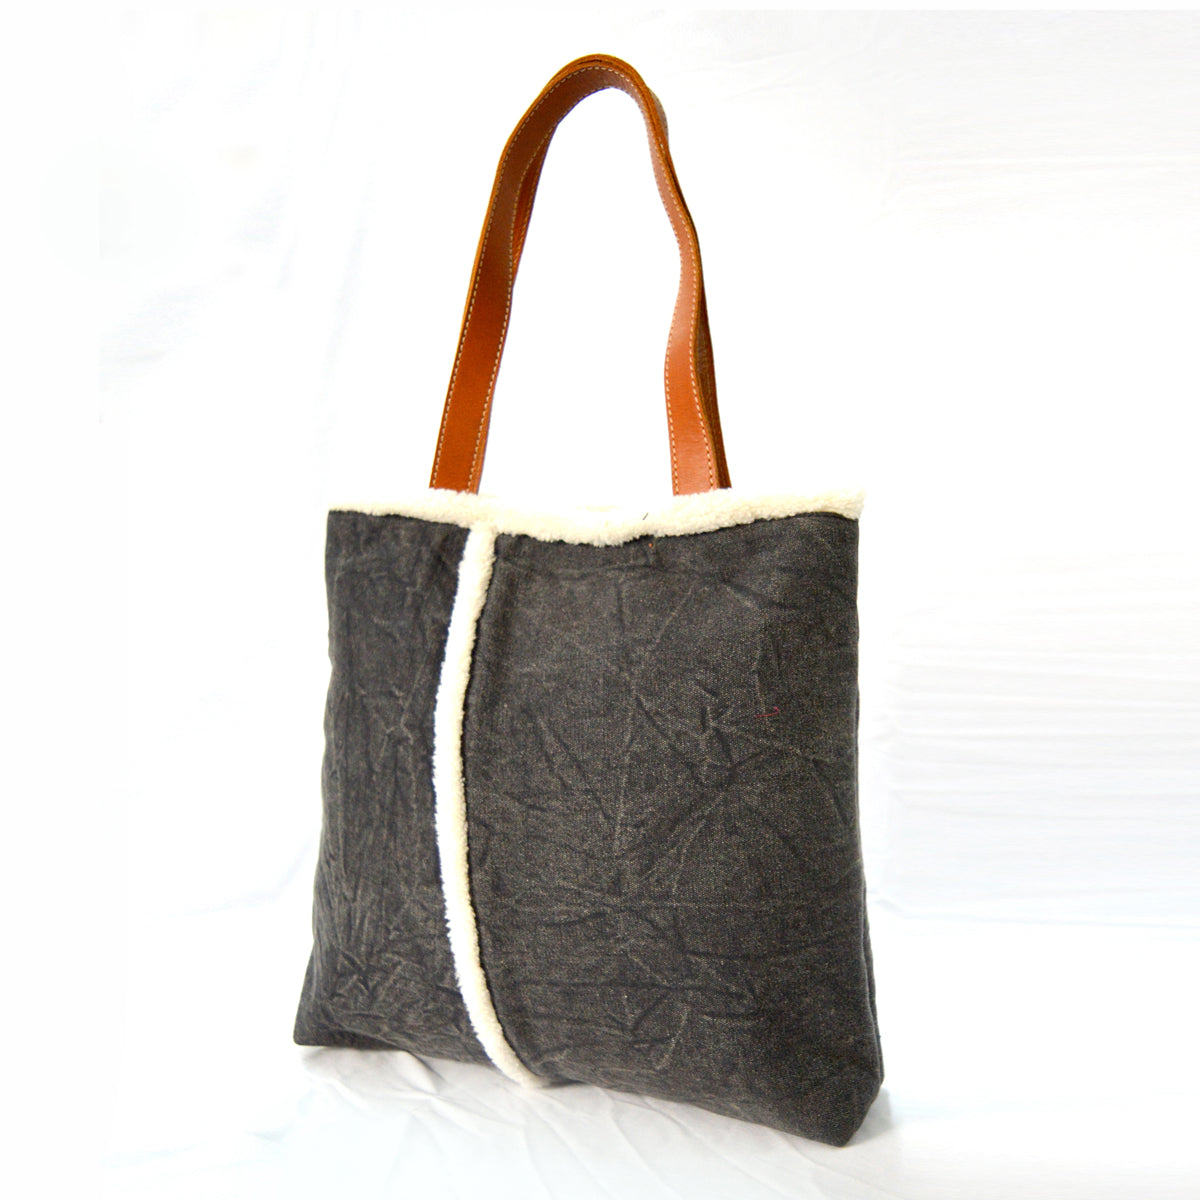 Tote bag - charcoal stonewashed canvas with leather handles